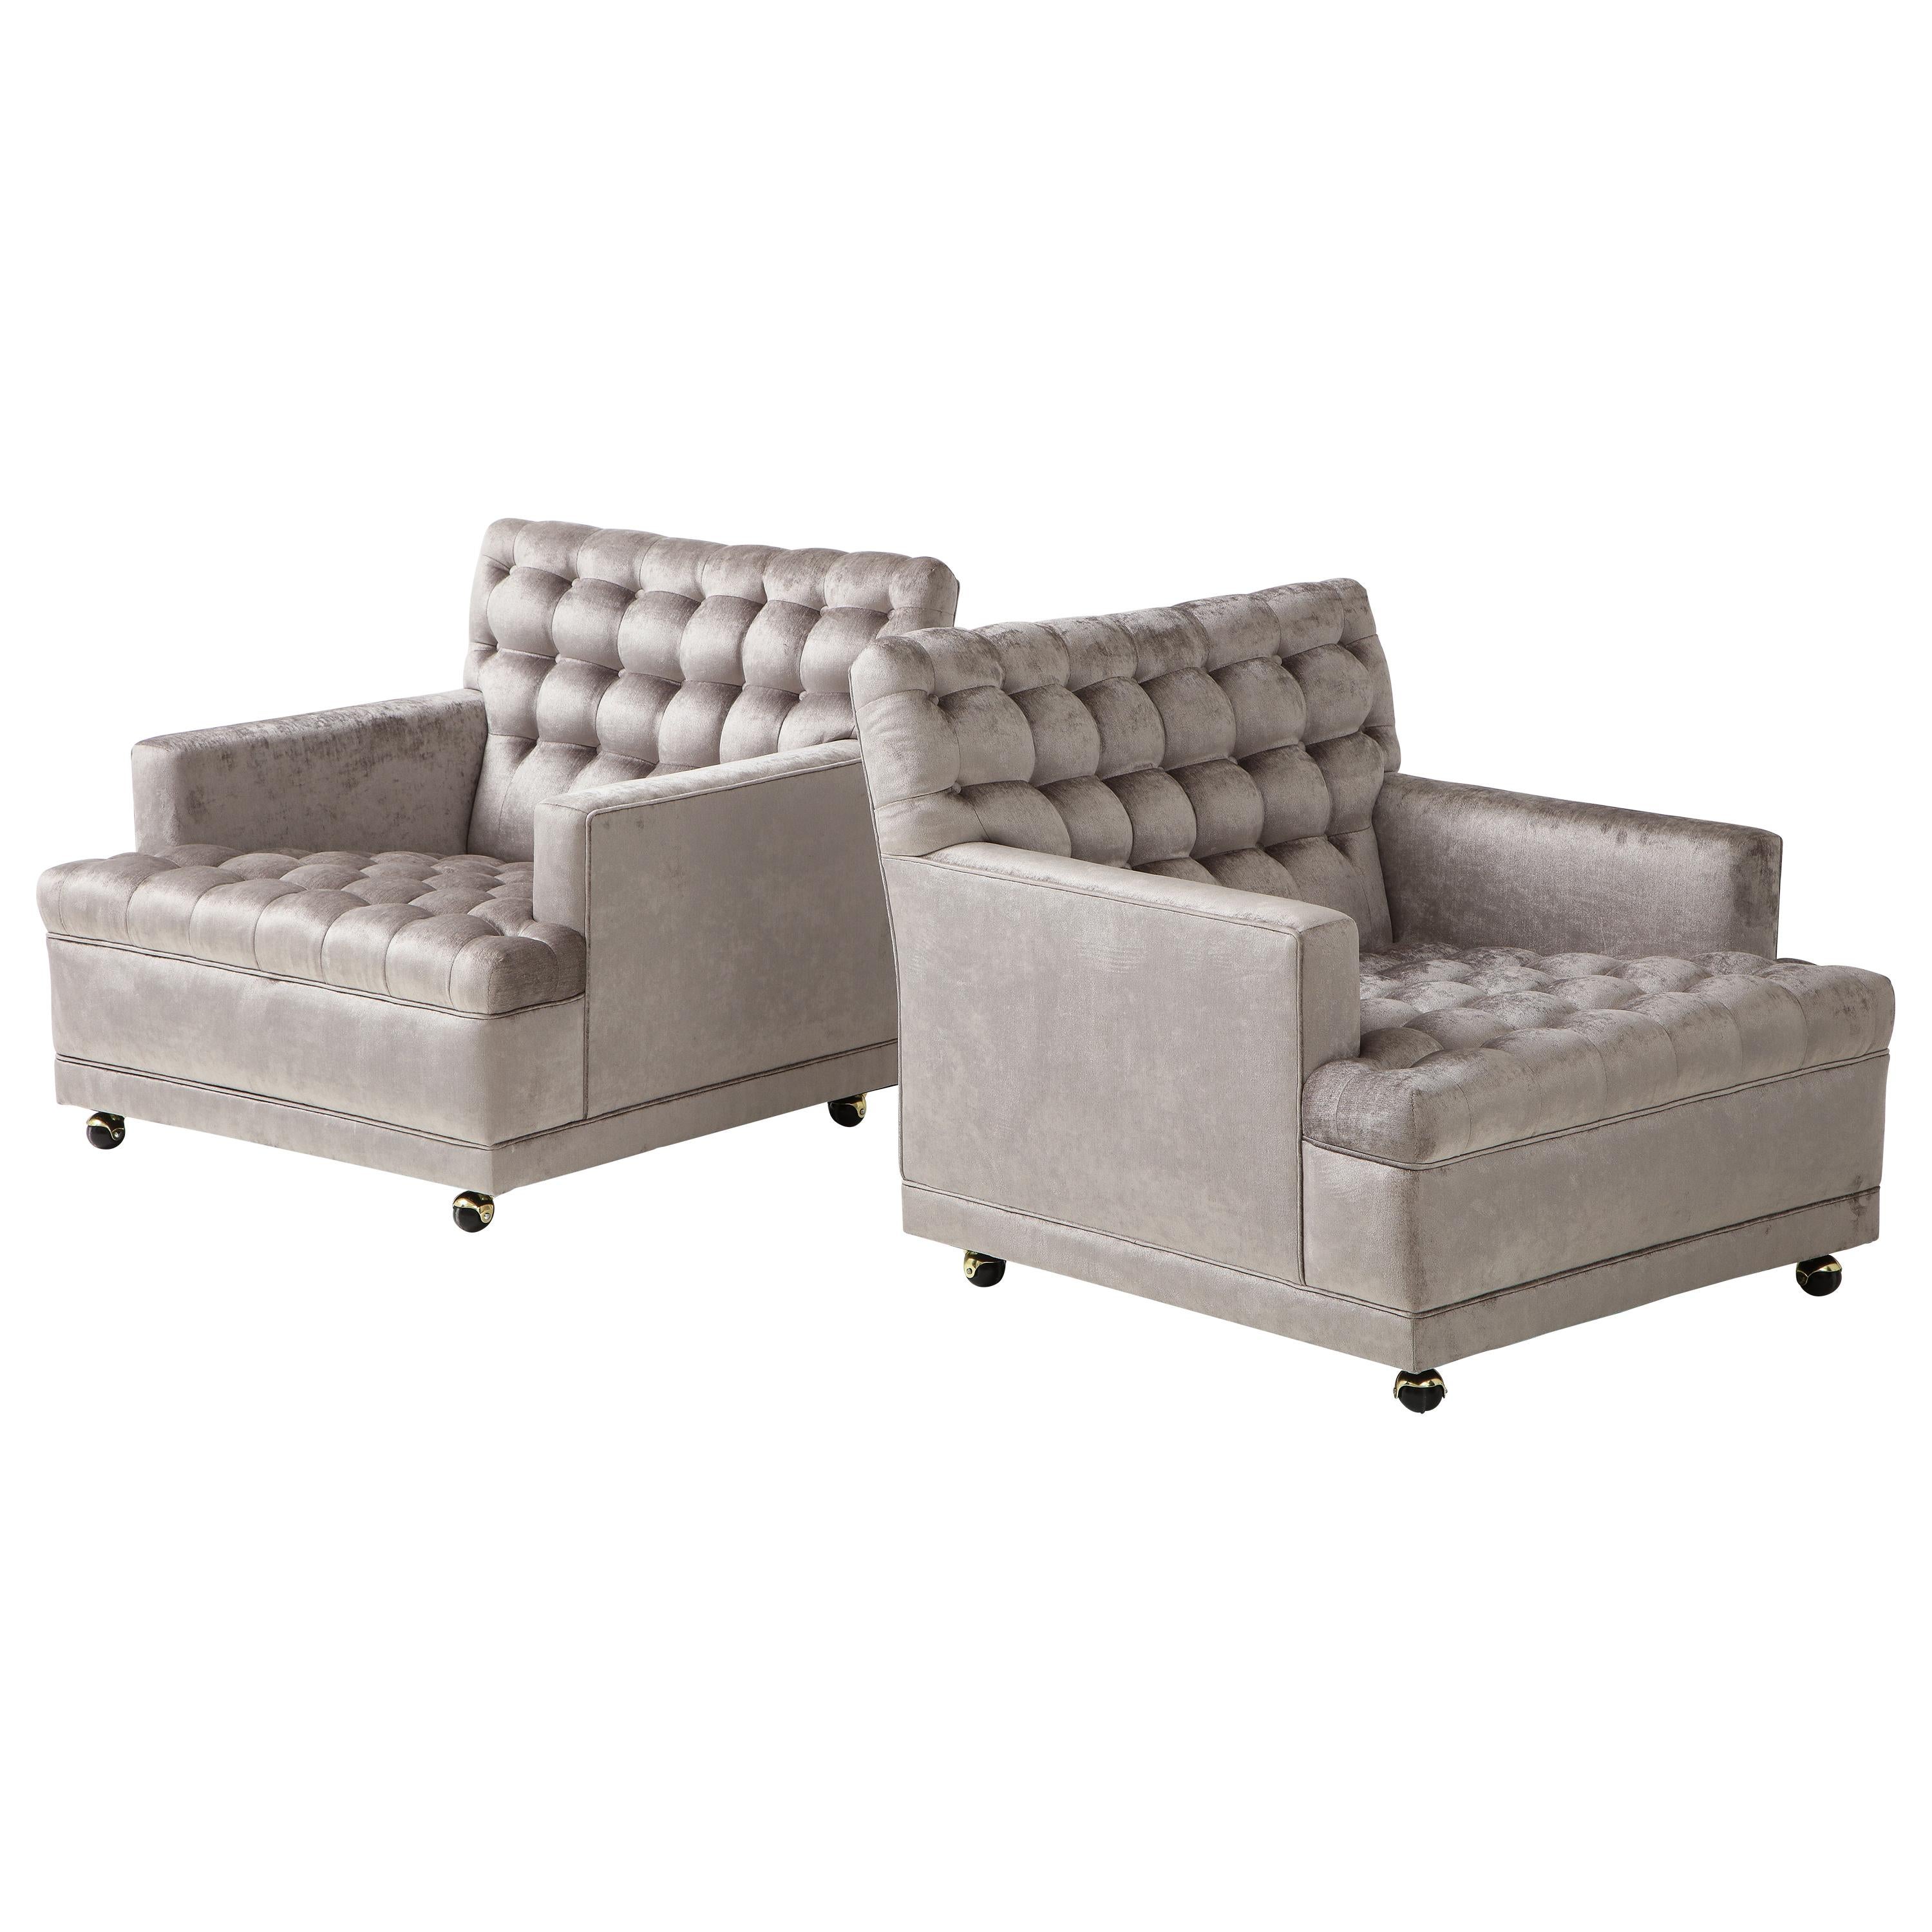 Pair of Biscuit Tufted Club Chairs.